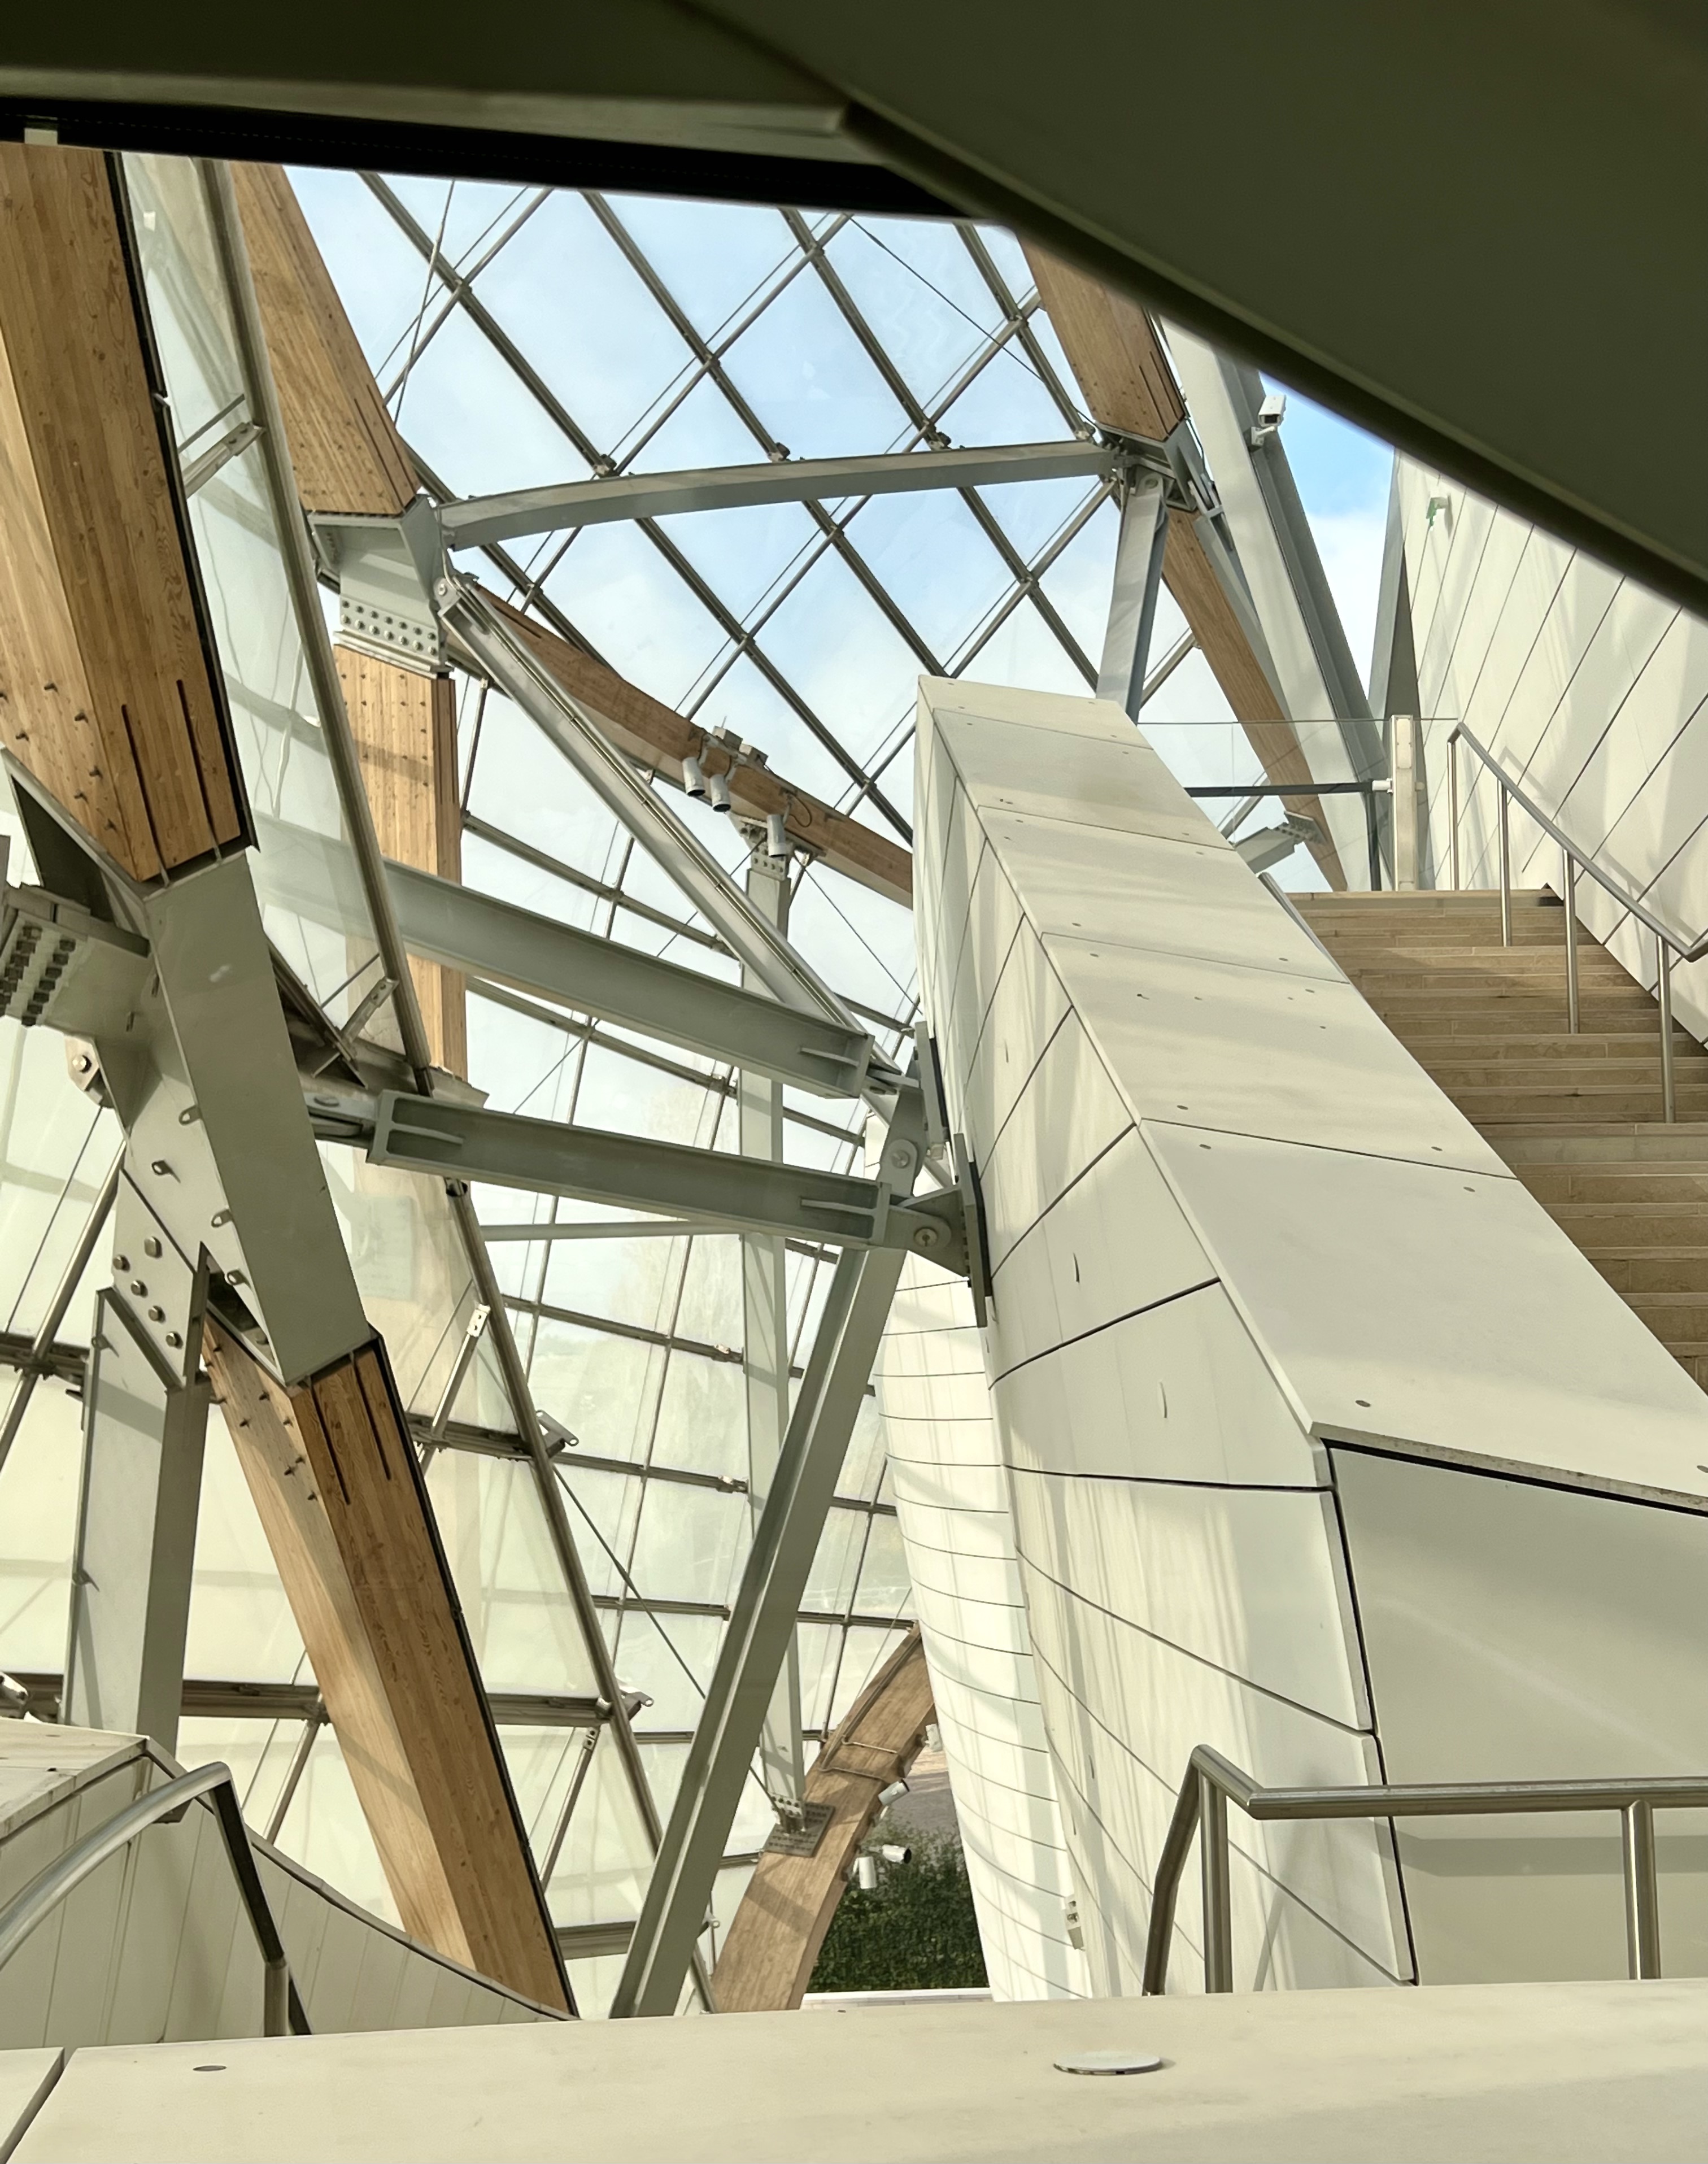 Guide To The Gehry-Designed Fondation Louis Vuitton In Paris - The ...